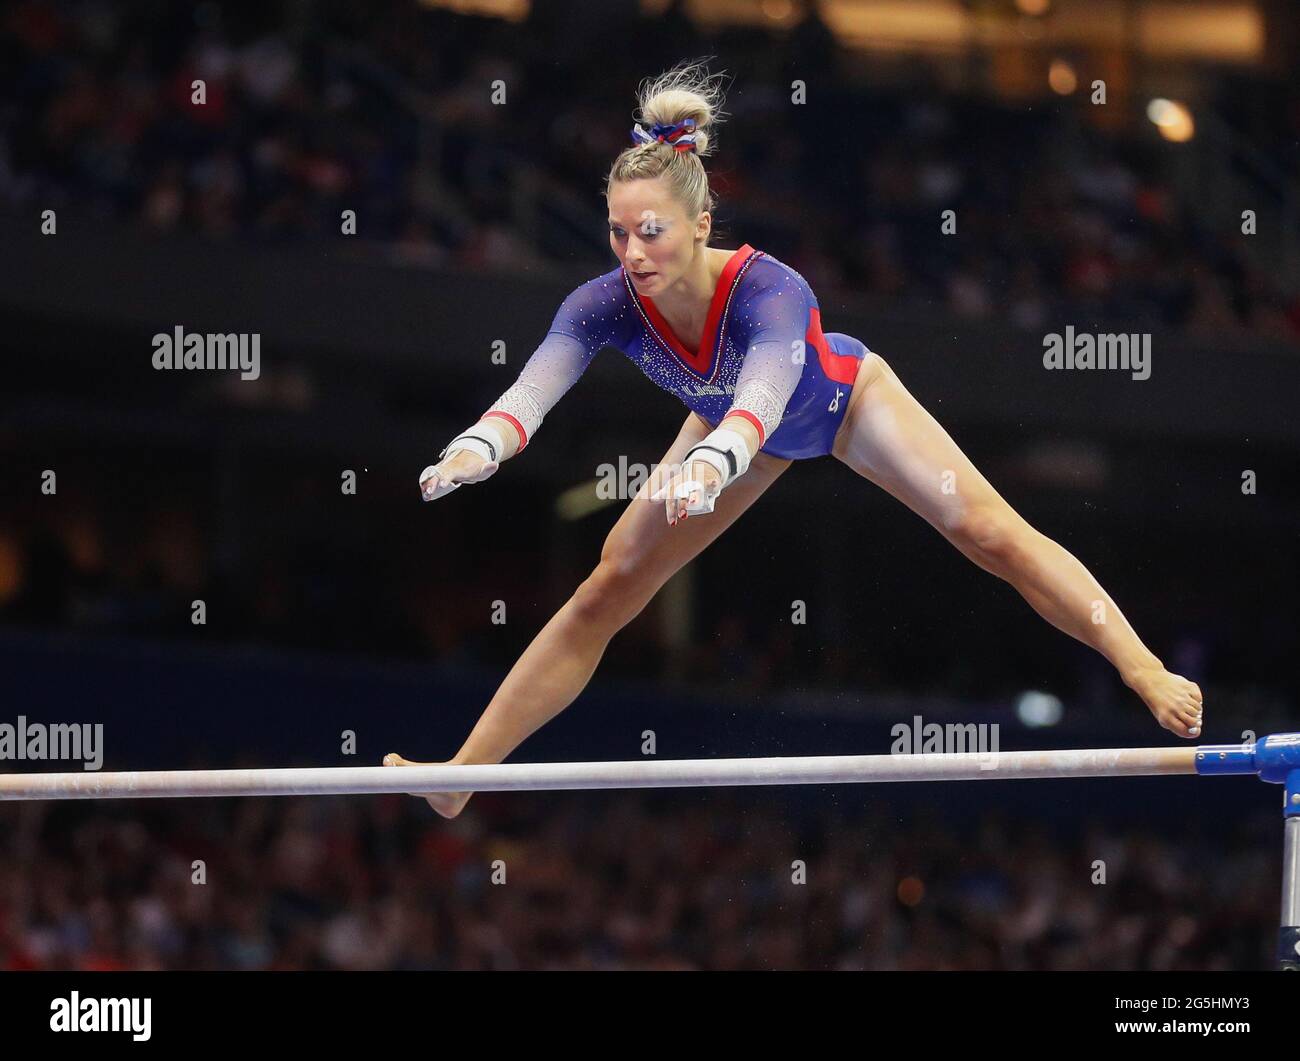 St Louis, USA. June 27, 2021: MyKayla Skinner performs on the uneven parallel bars during Day 2 of the 2021 U.S. Women's Gymnastics Olympic Team Trials at the Dome at America's Center in St. Louis, MO. Kyle Okita/CSM Credit: Cal Sport Media/Alamy Live News Stock Photo